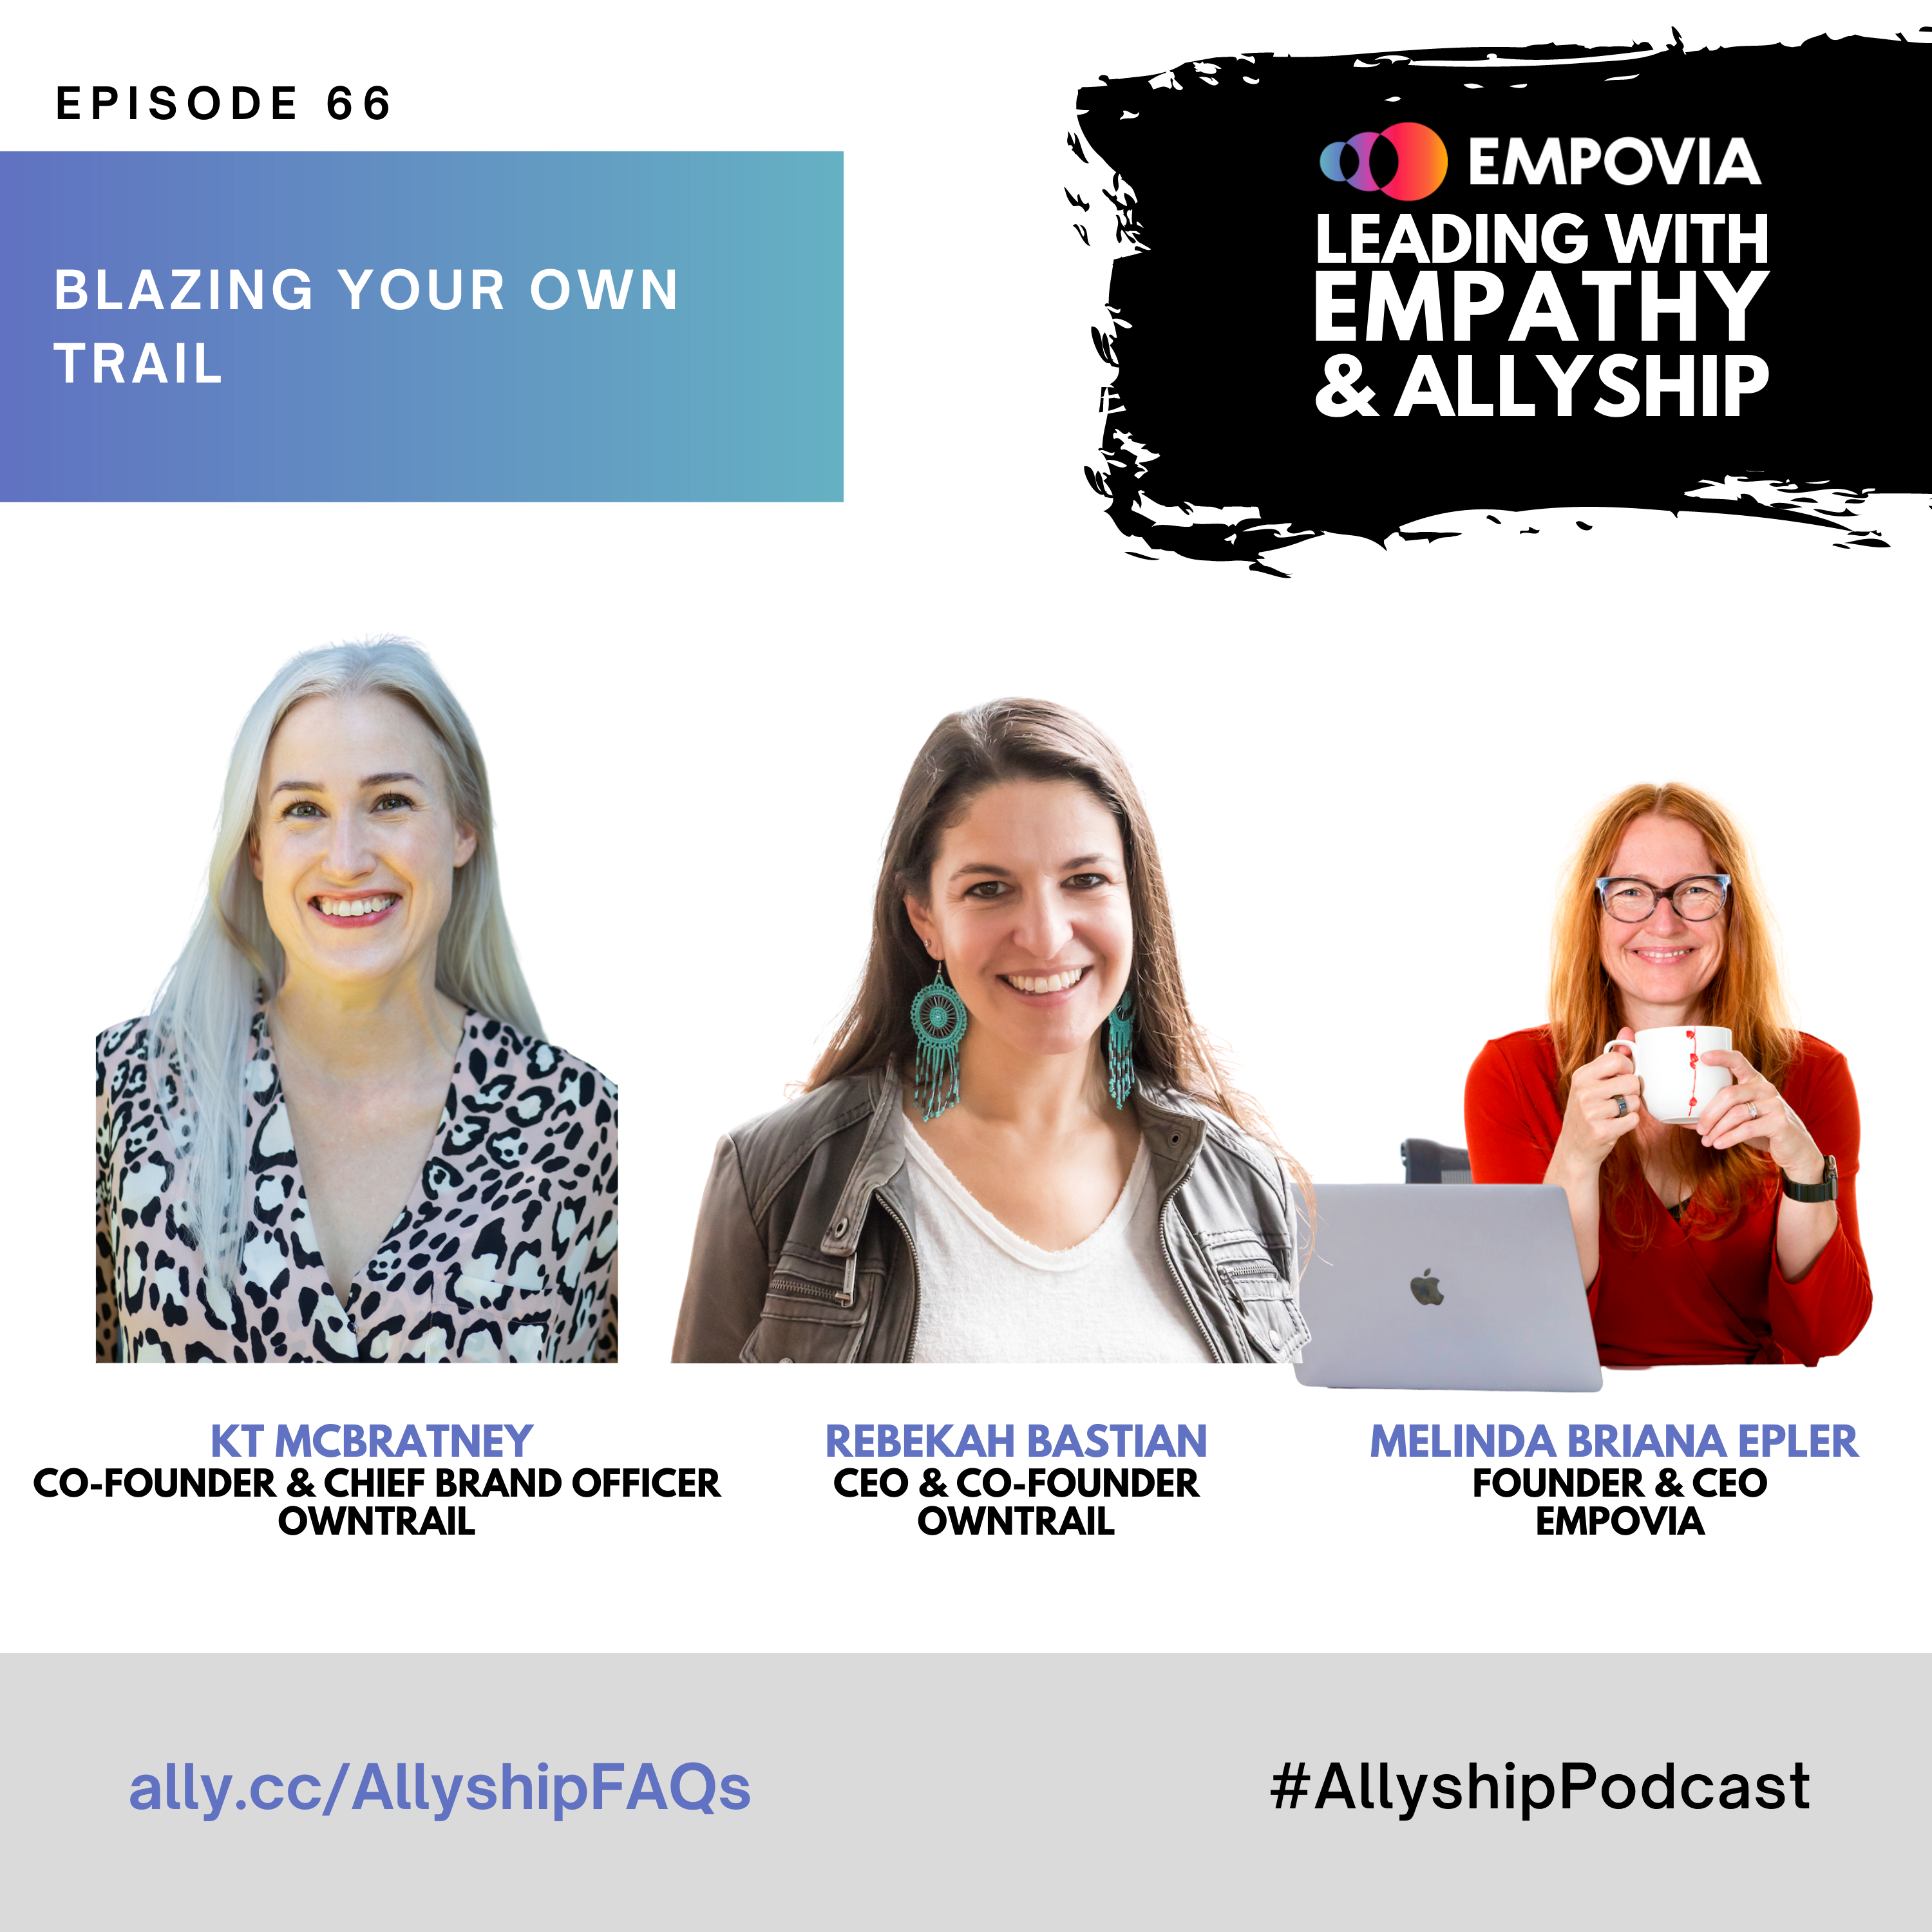 Leading With Empathy & Allyship promo with the Empovia logo and photos of Kt McBratney, a White nonbinary person with long platinum hair and pink animal print blouse; Rebekah Bastian, a White woman with long brown hair, dangling turquoise earrings, and leather jacket on top of a white shirt; and host Melinda Briana Epler, a White woman with red hair, glasses, and orange shirt holding a white mug behind a laptop.